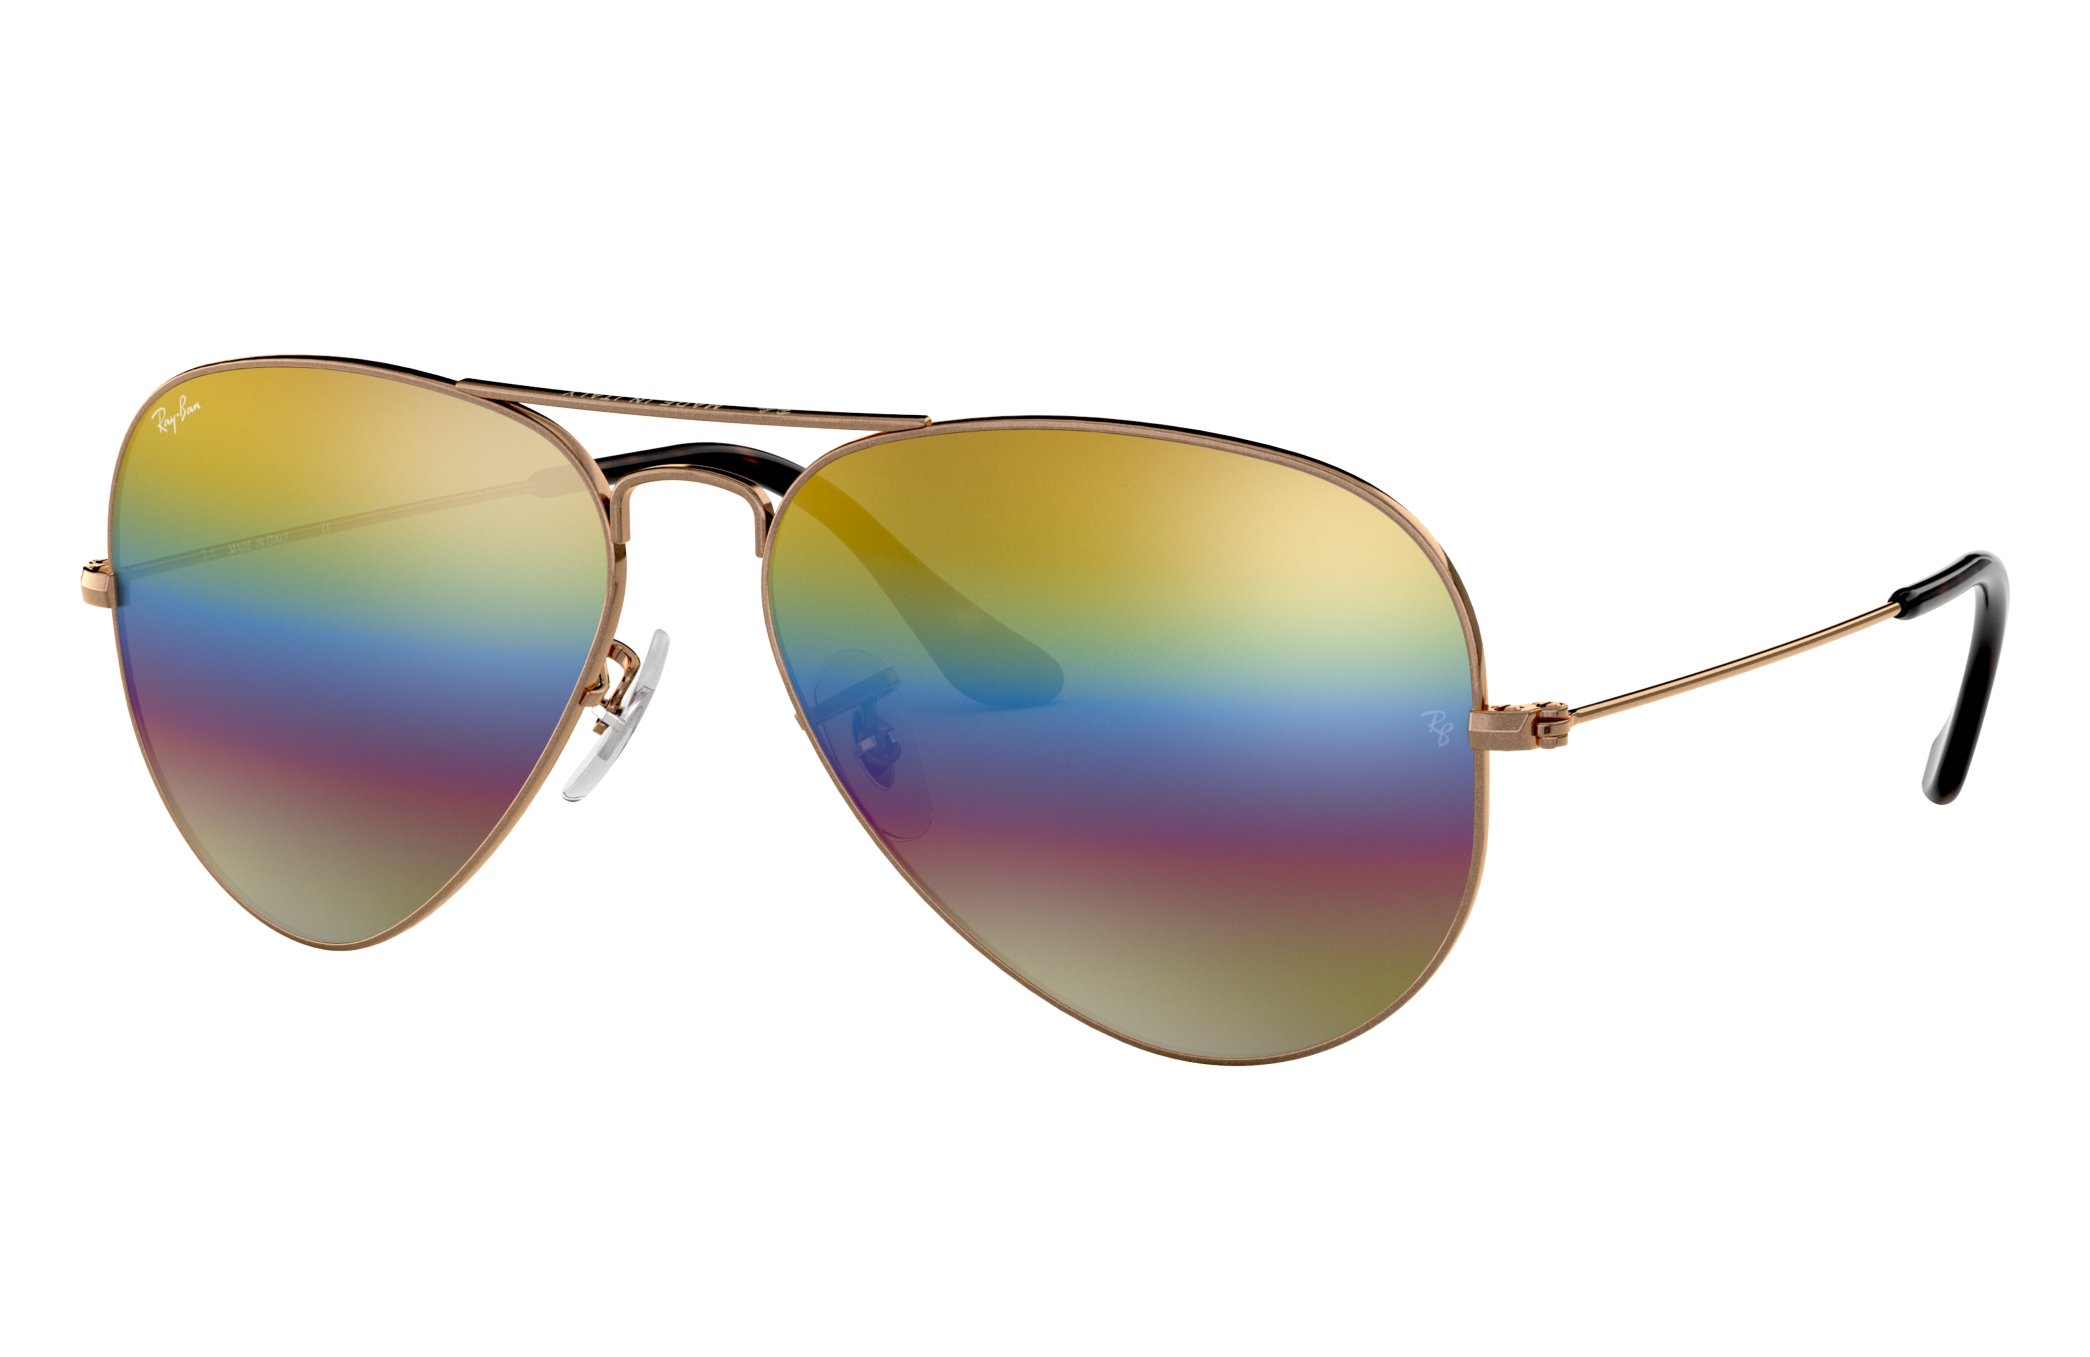 Aviator Mineral Flash Lenses Sunglasses in Bronze and Gold Rainbow | Ray-Ban ®